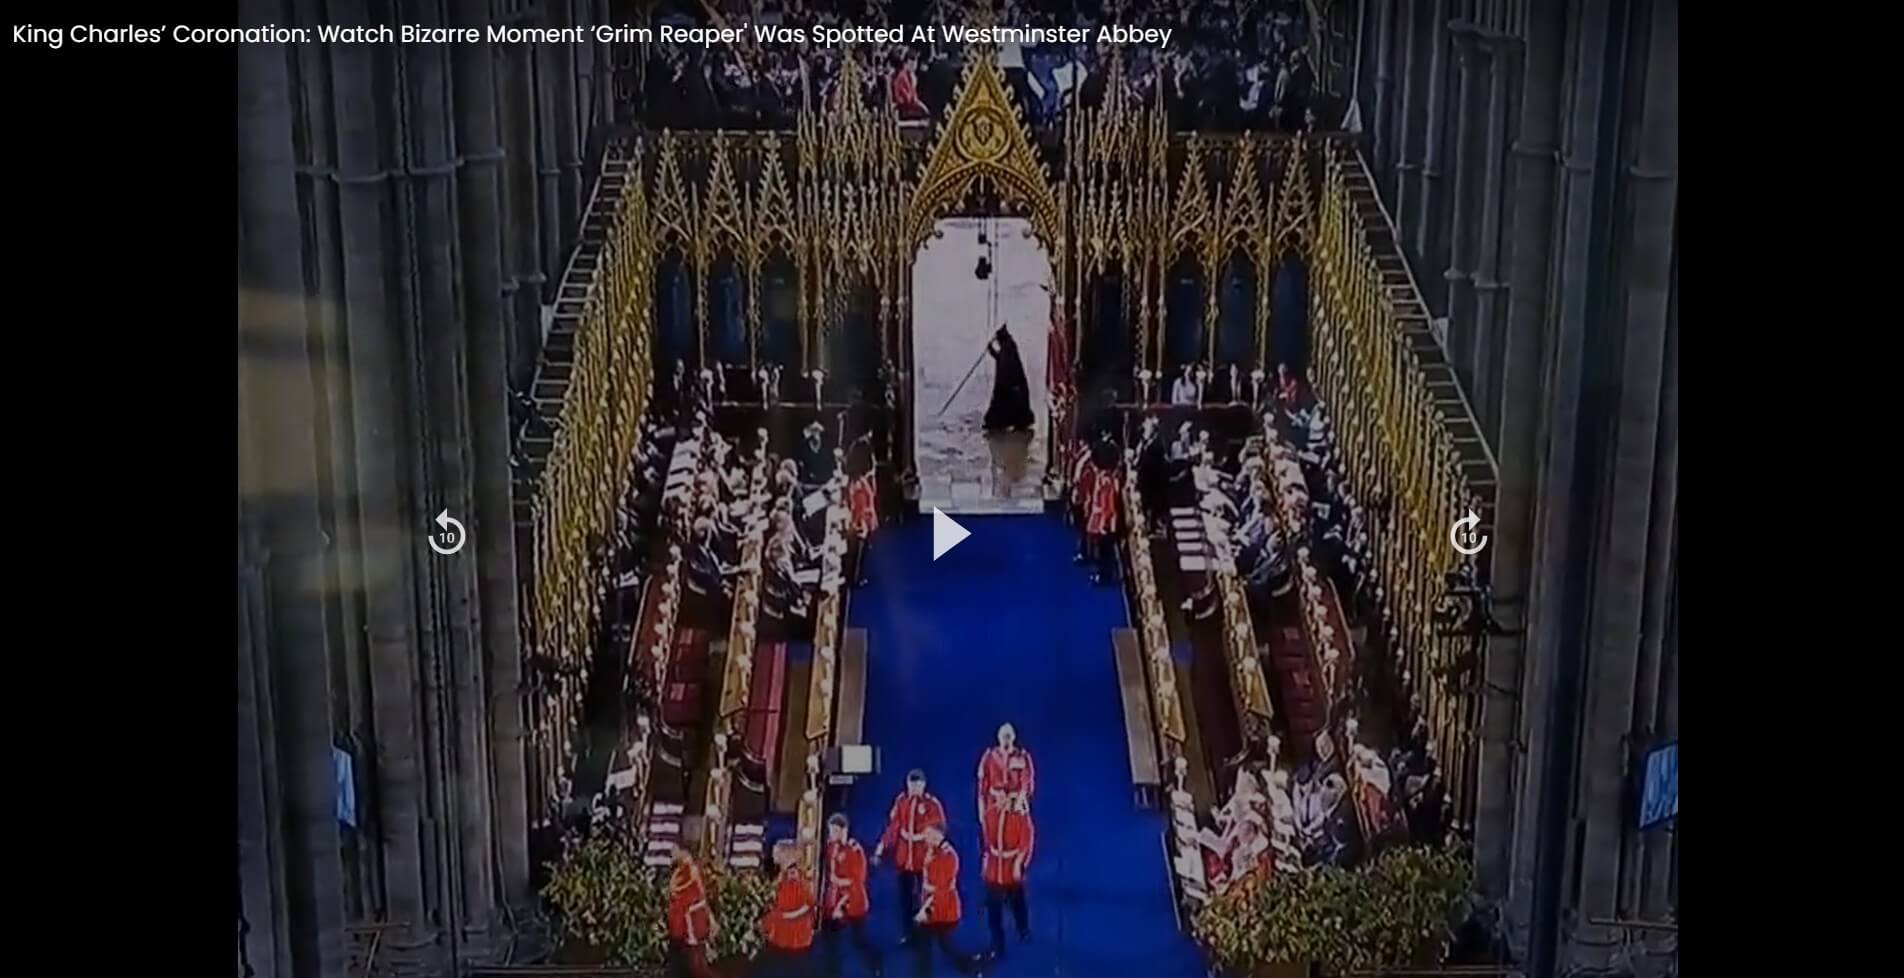 Grim Reaper spotted at King Charles’ coronation